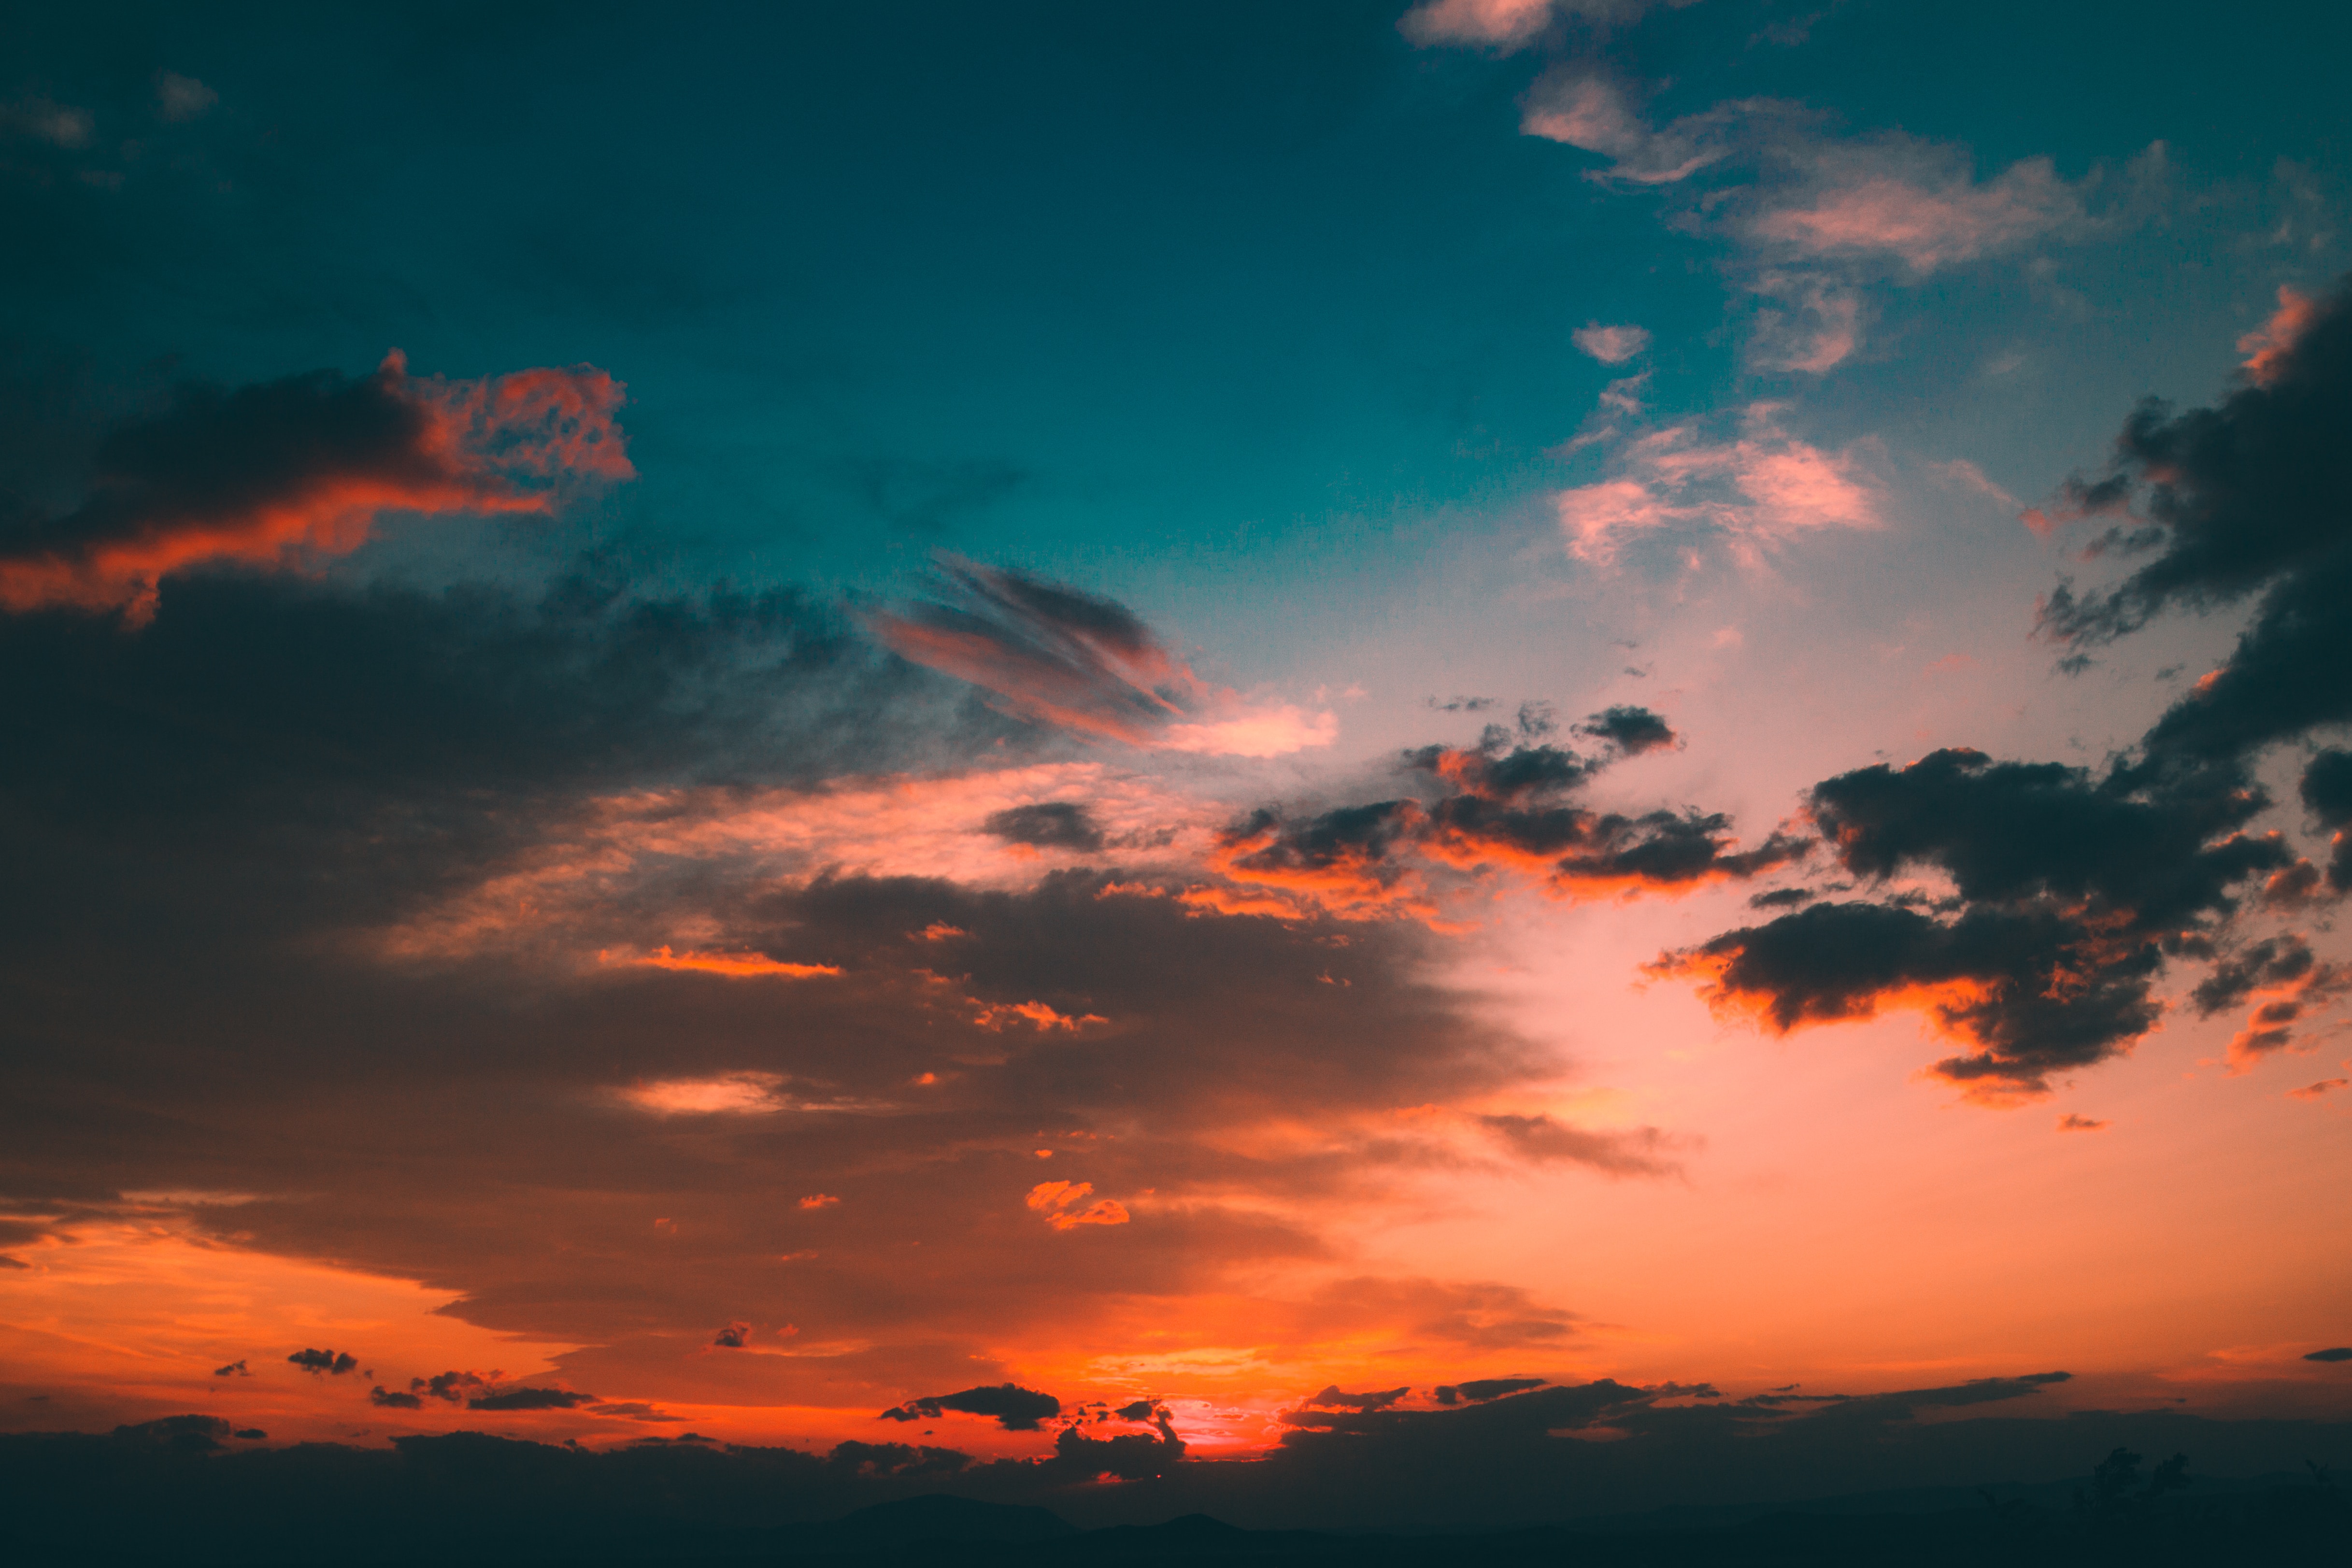 sky clouds sunset background 307527956177201 by @freetoedit.